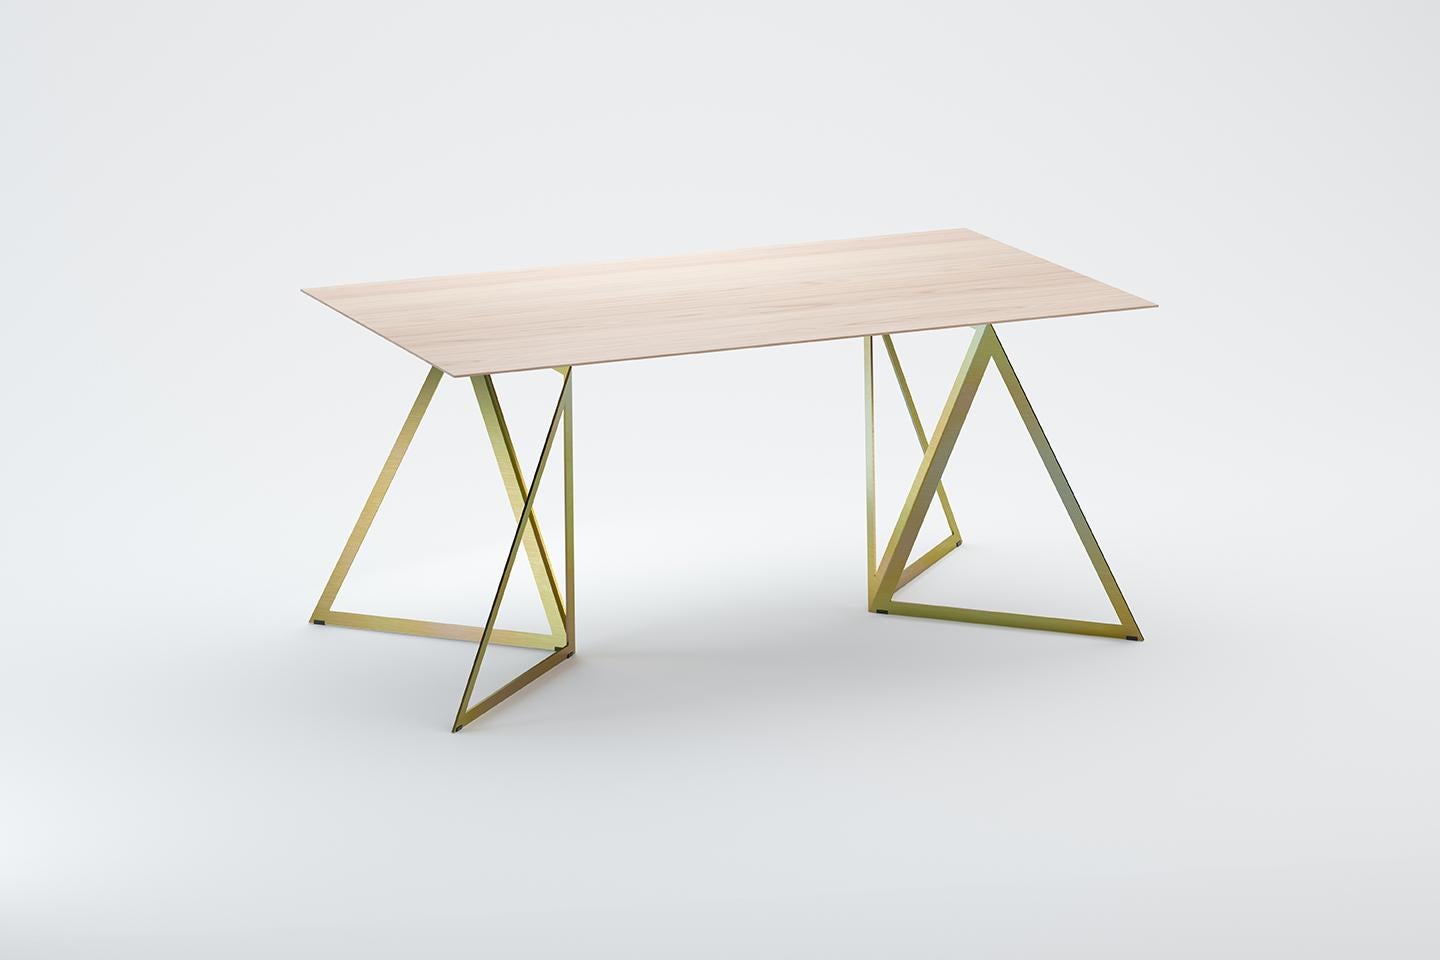 Steel stand table 160 Ash by Sebastian Scherer.
Dimensions: D160 x W90 x H74 cm.
Materials: Ash, Steel, Wood.
Also Available: Colours:Solid wood (matt lacquered or oiled): black and white stained ash / natural oak / american walnut
Steel (matt):